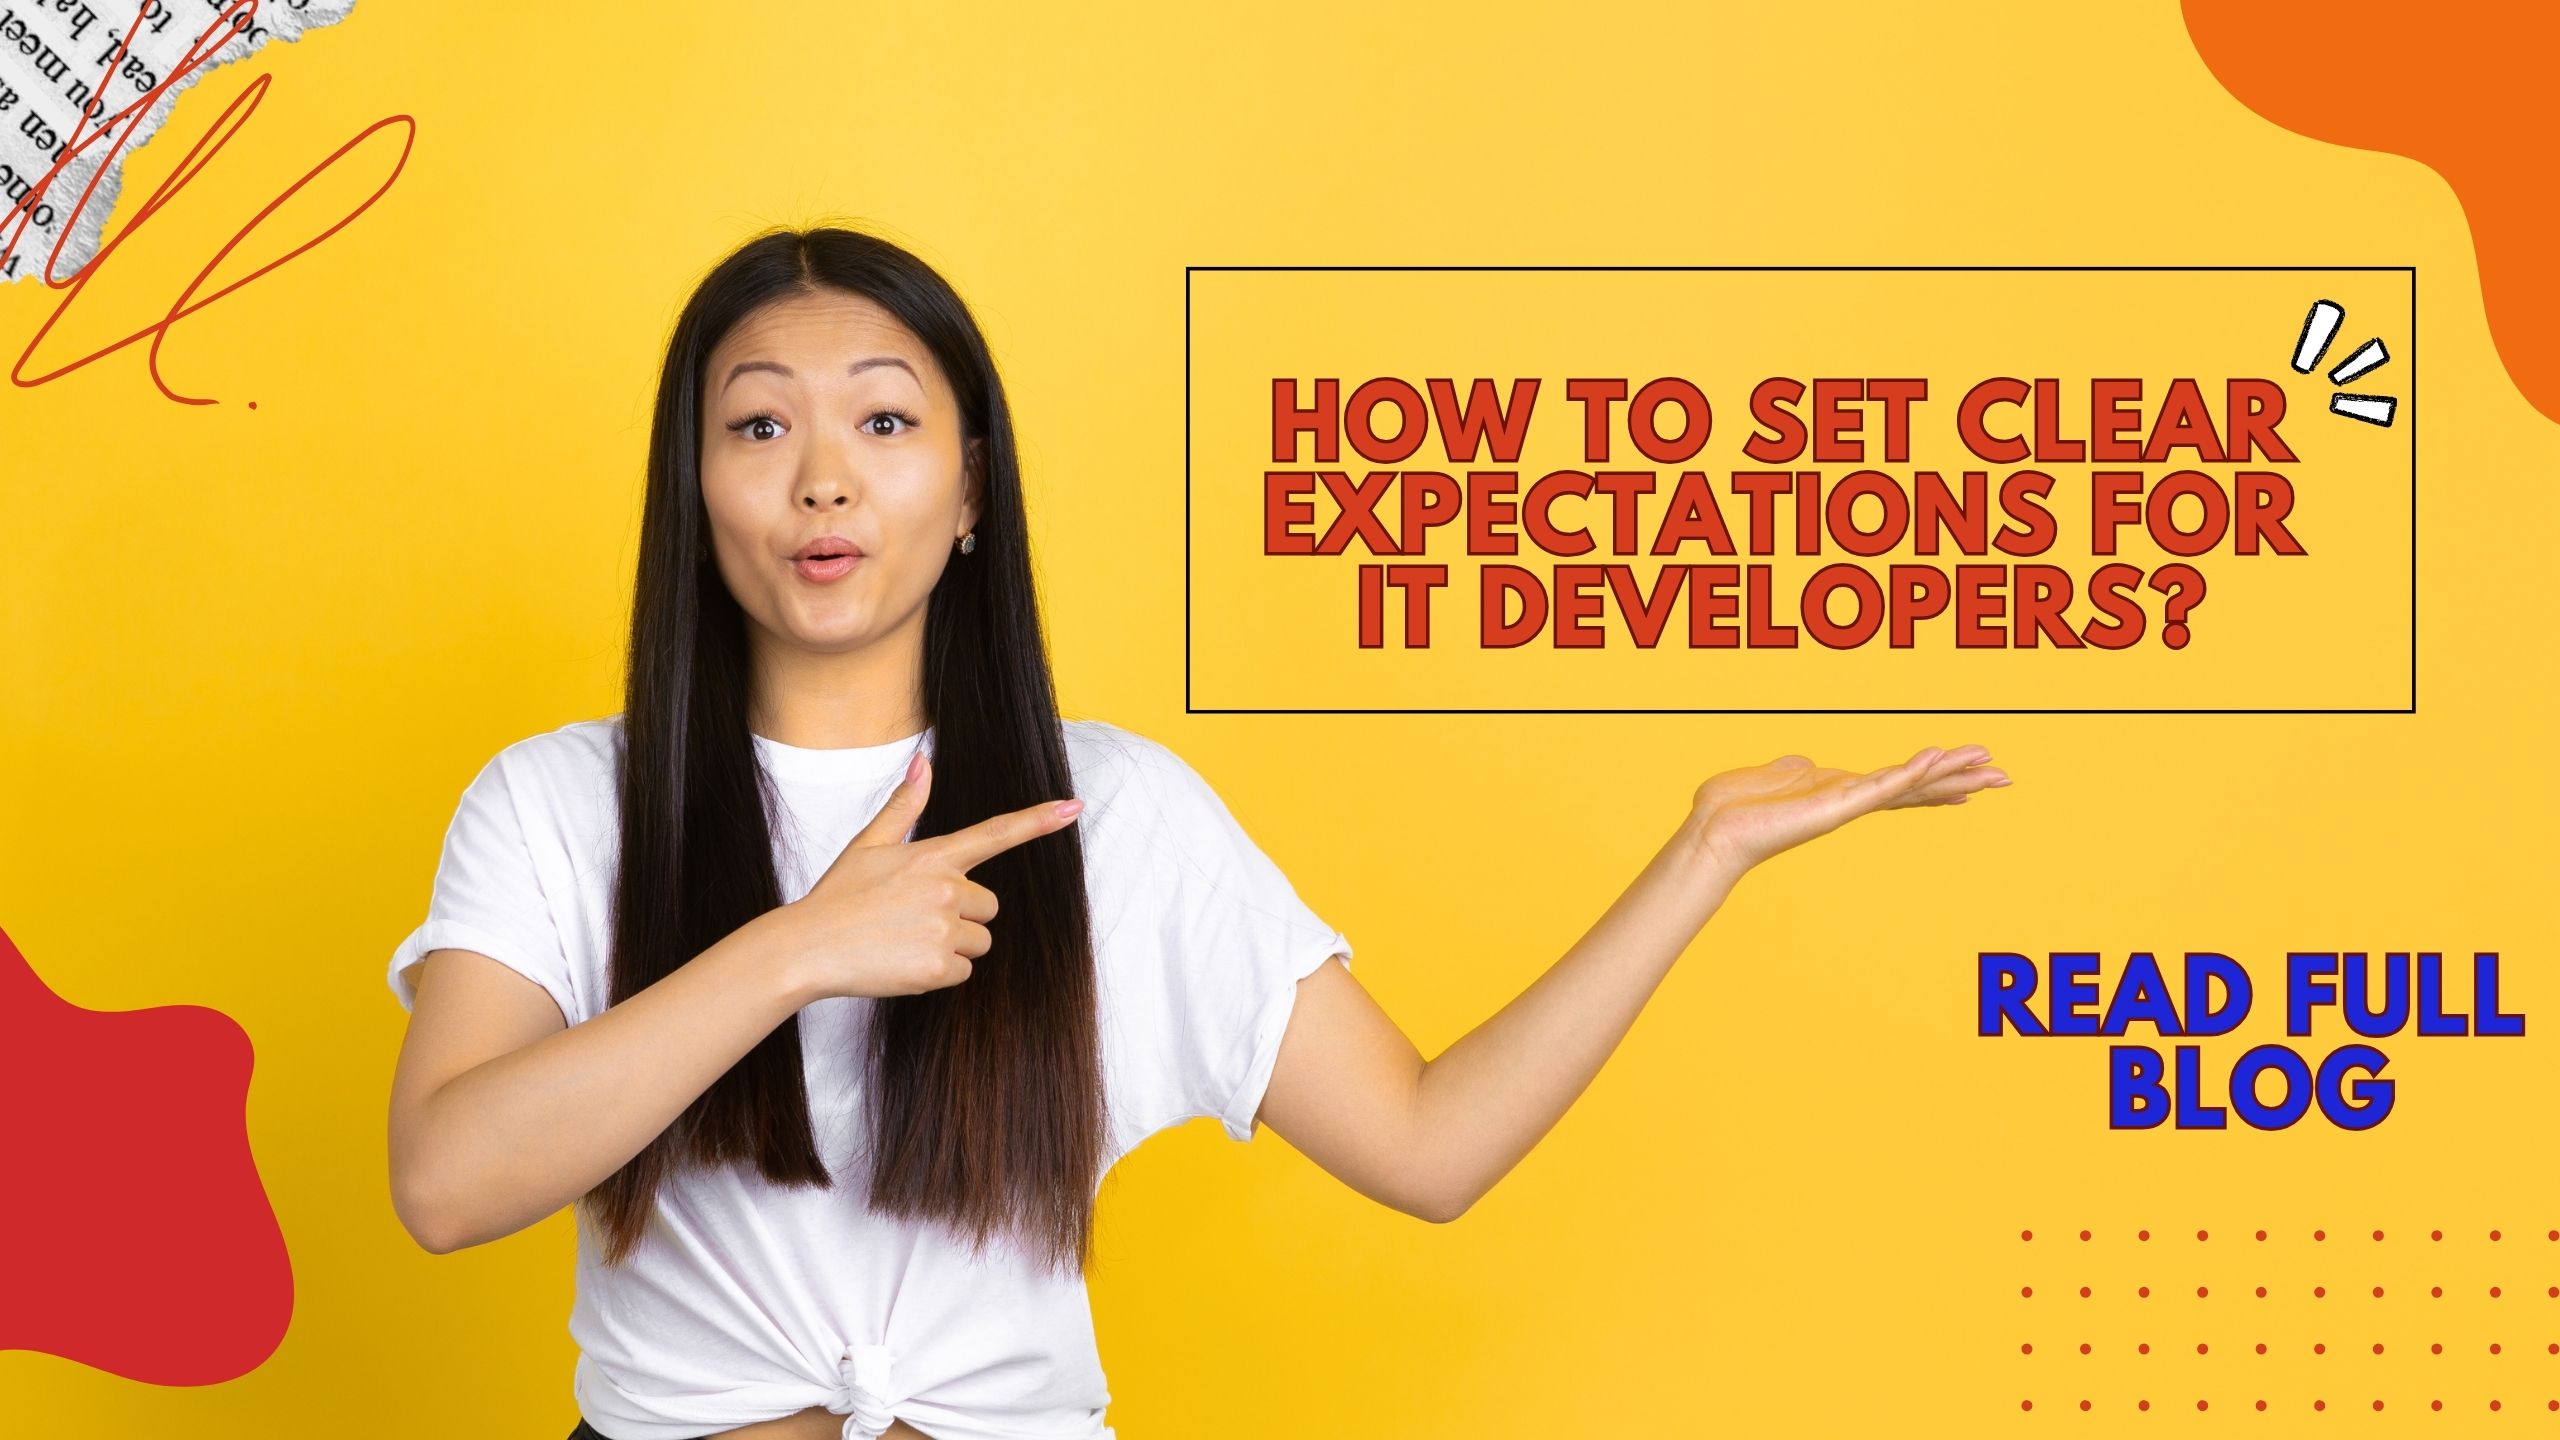 How to Set Clear Expectations for IT Developers?